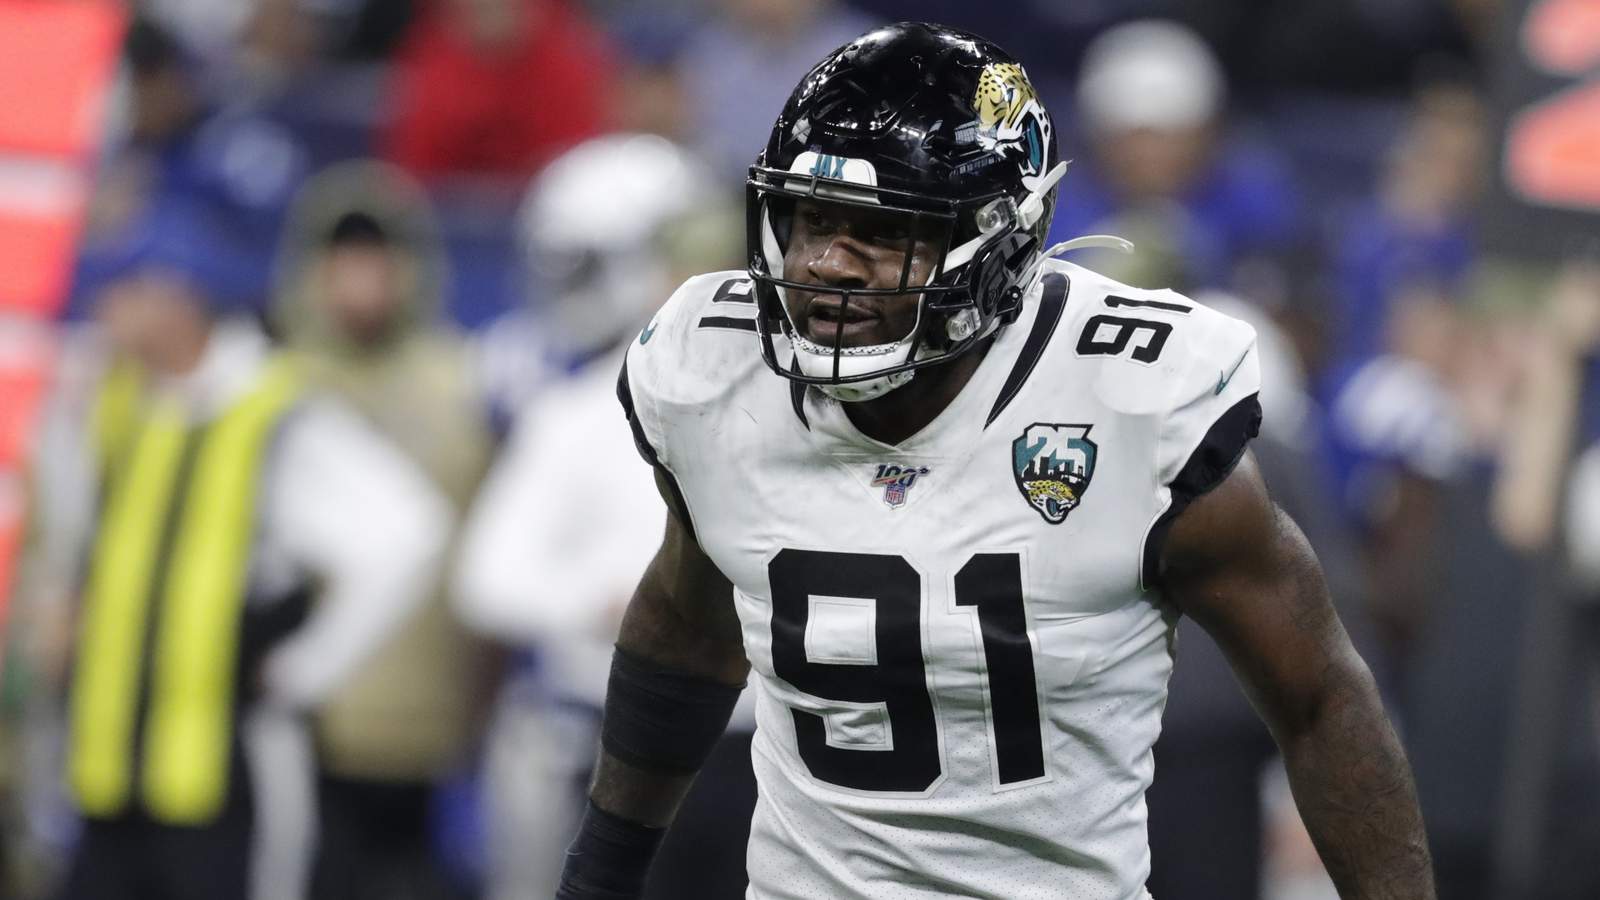 Jaguars fans have good reason to vote ex-player Ngakoue to Pro Bowl